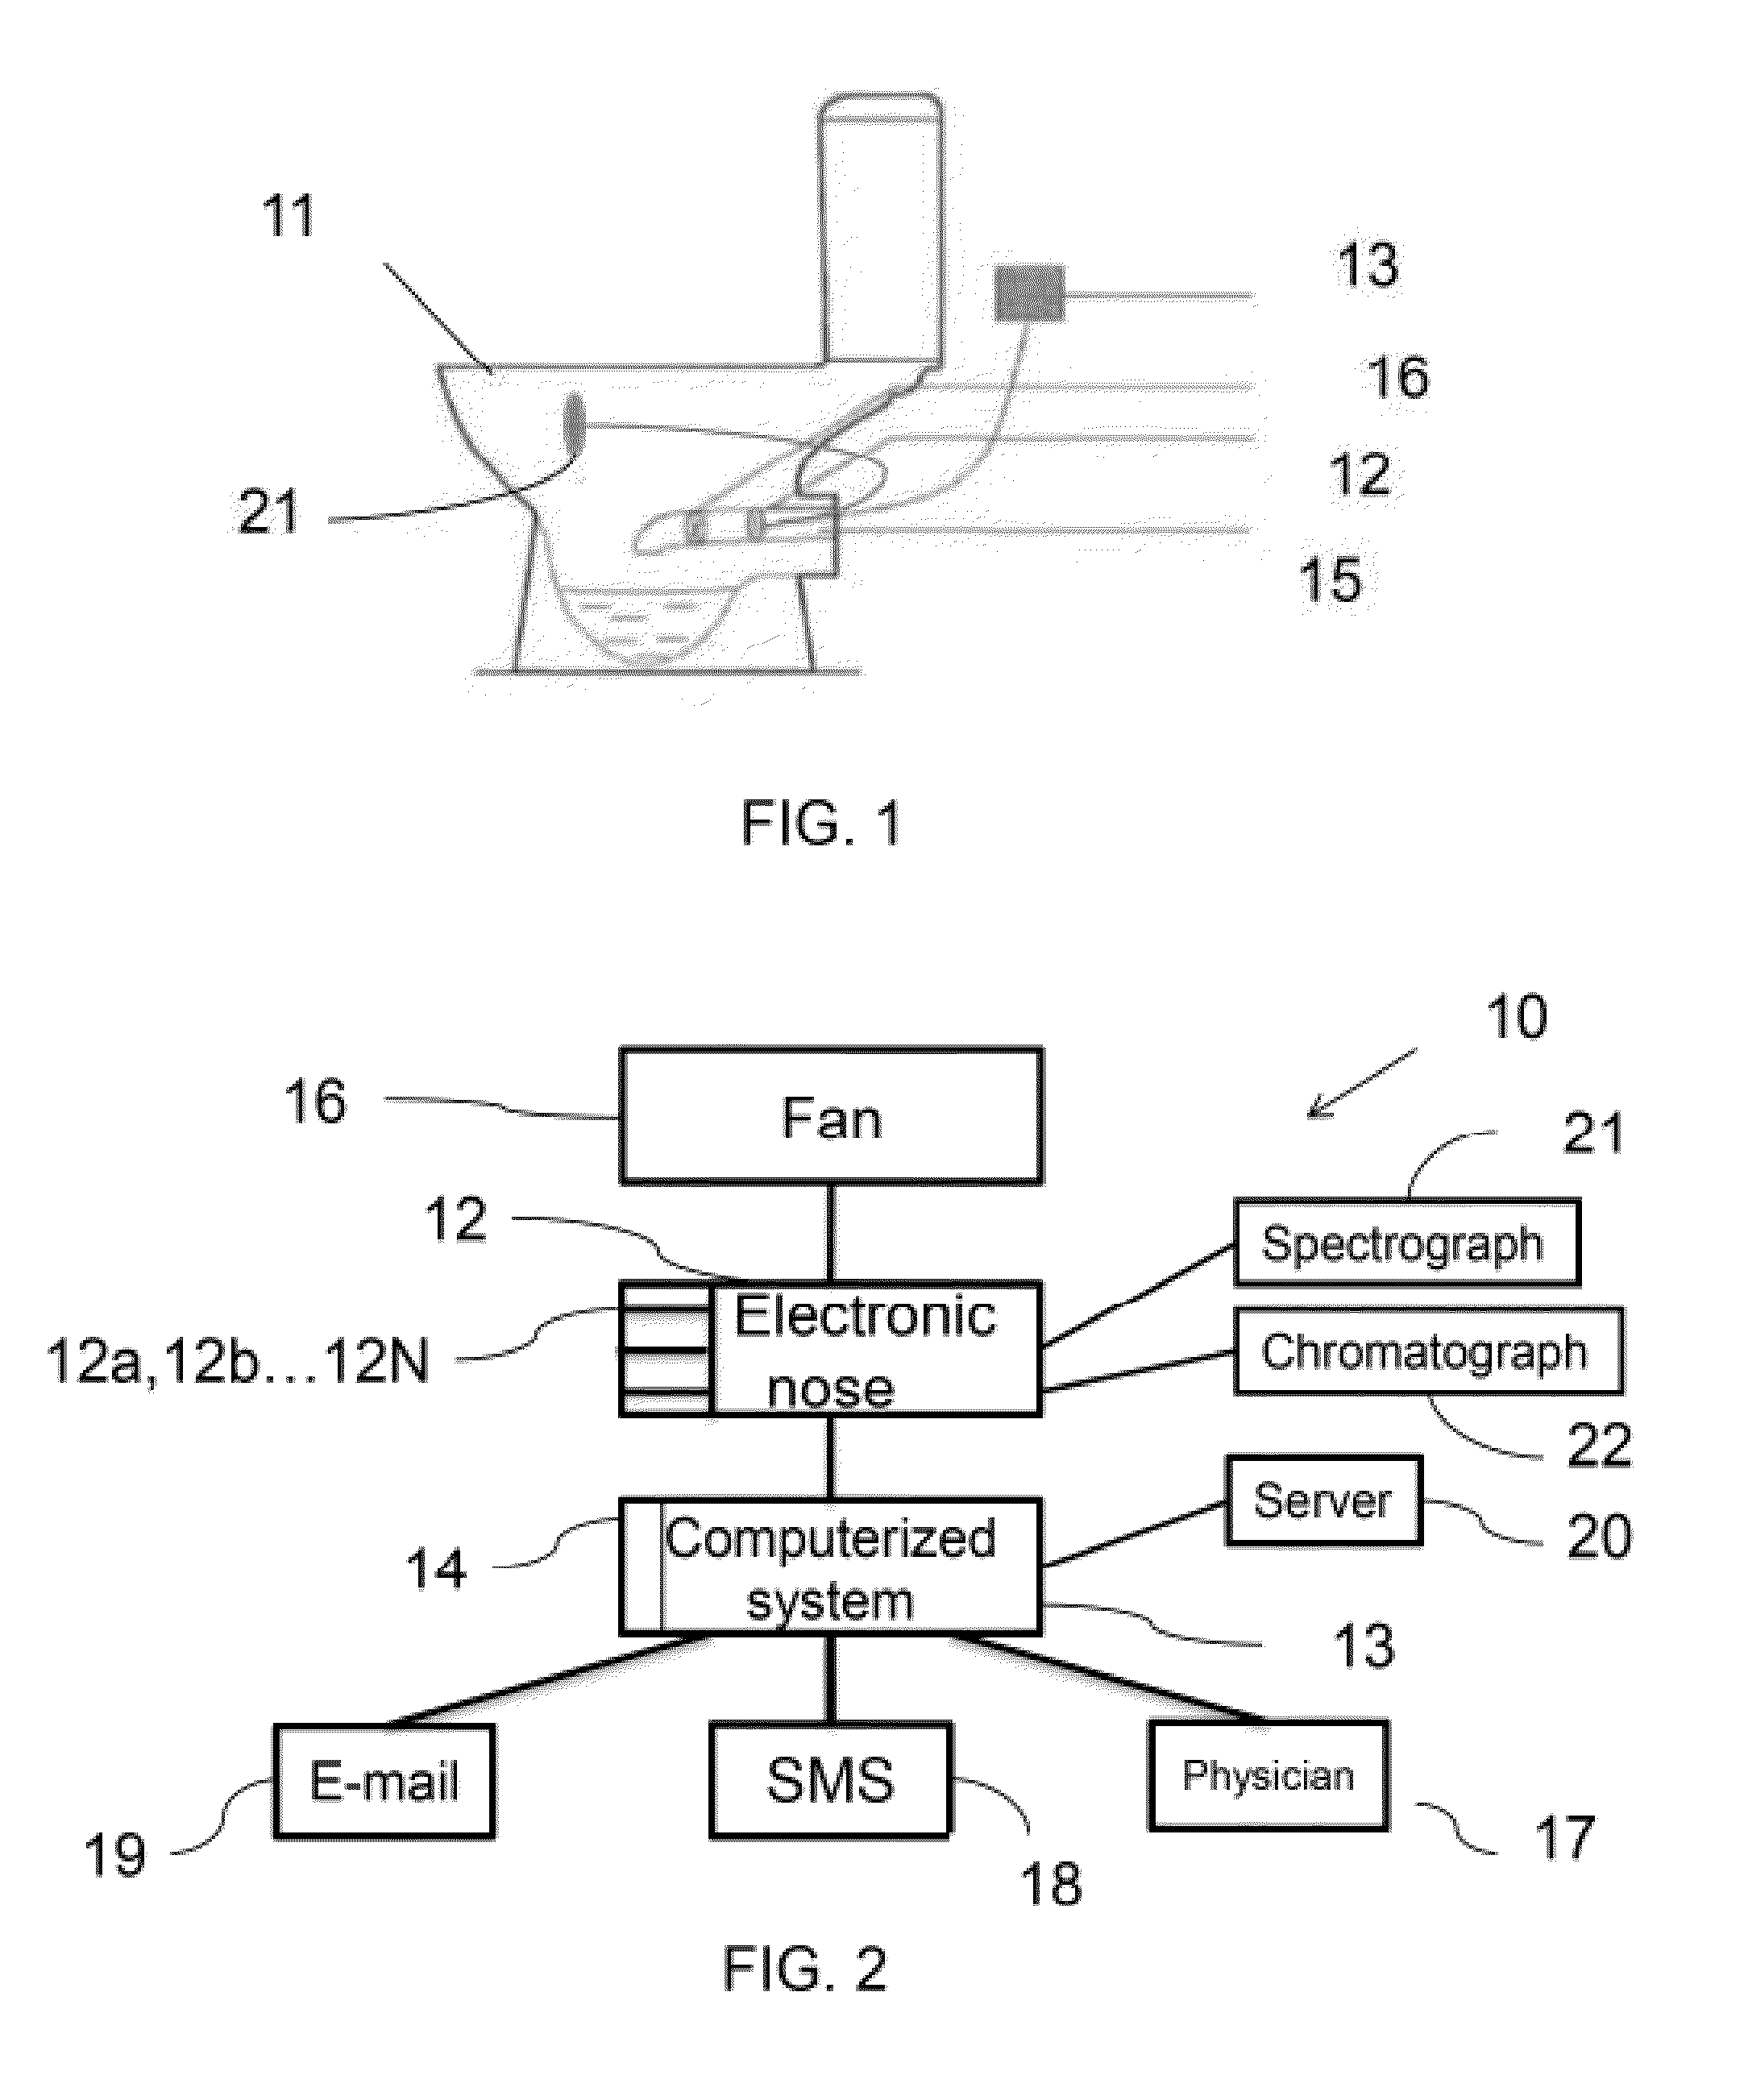 Apparatus for detection of pathological and normal physiological processes in humans